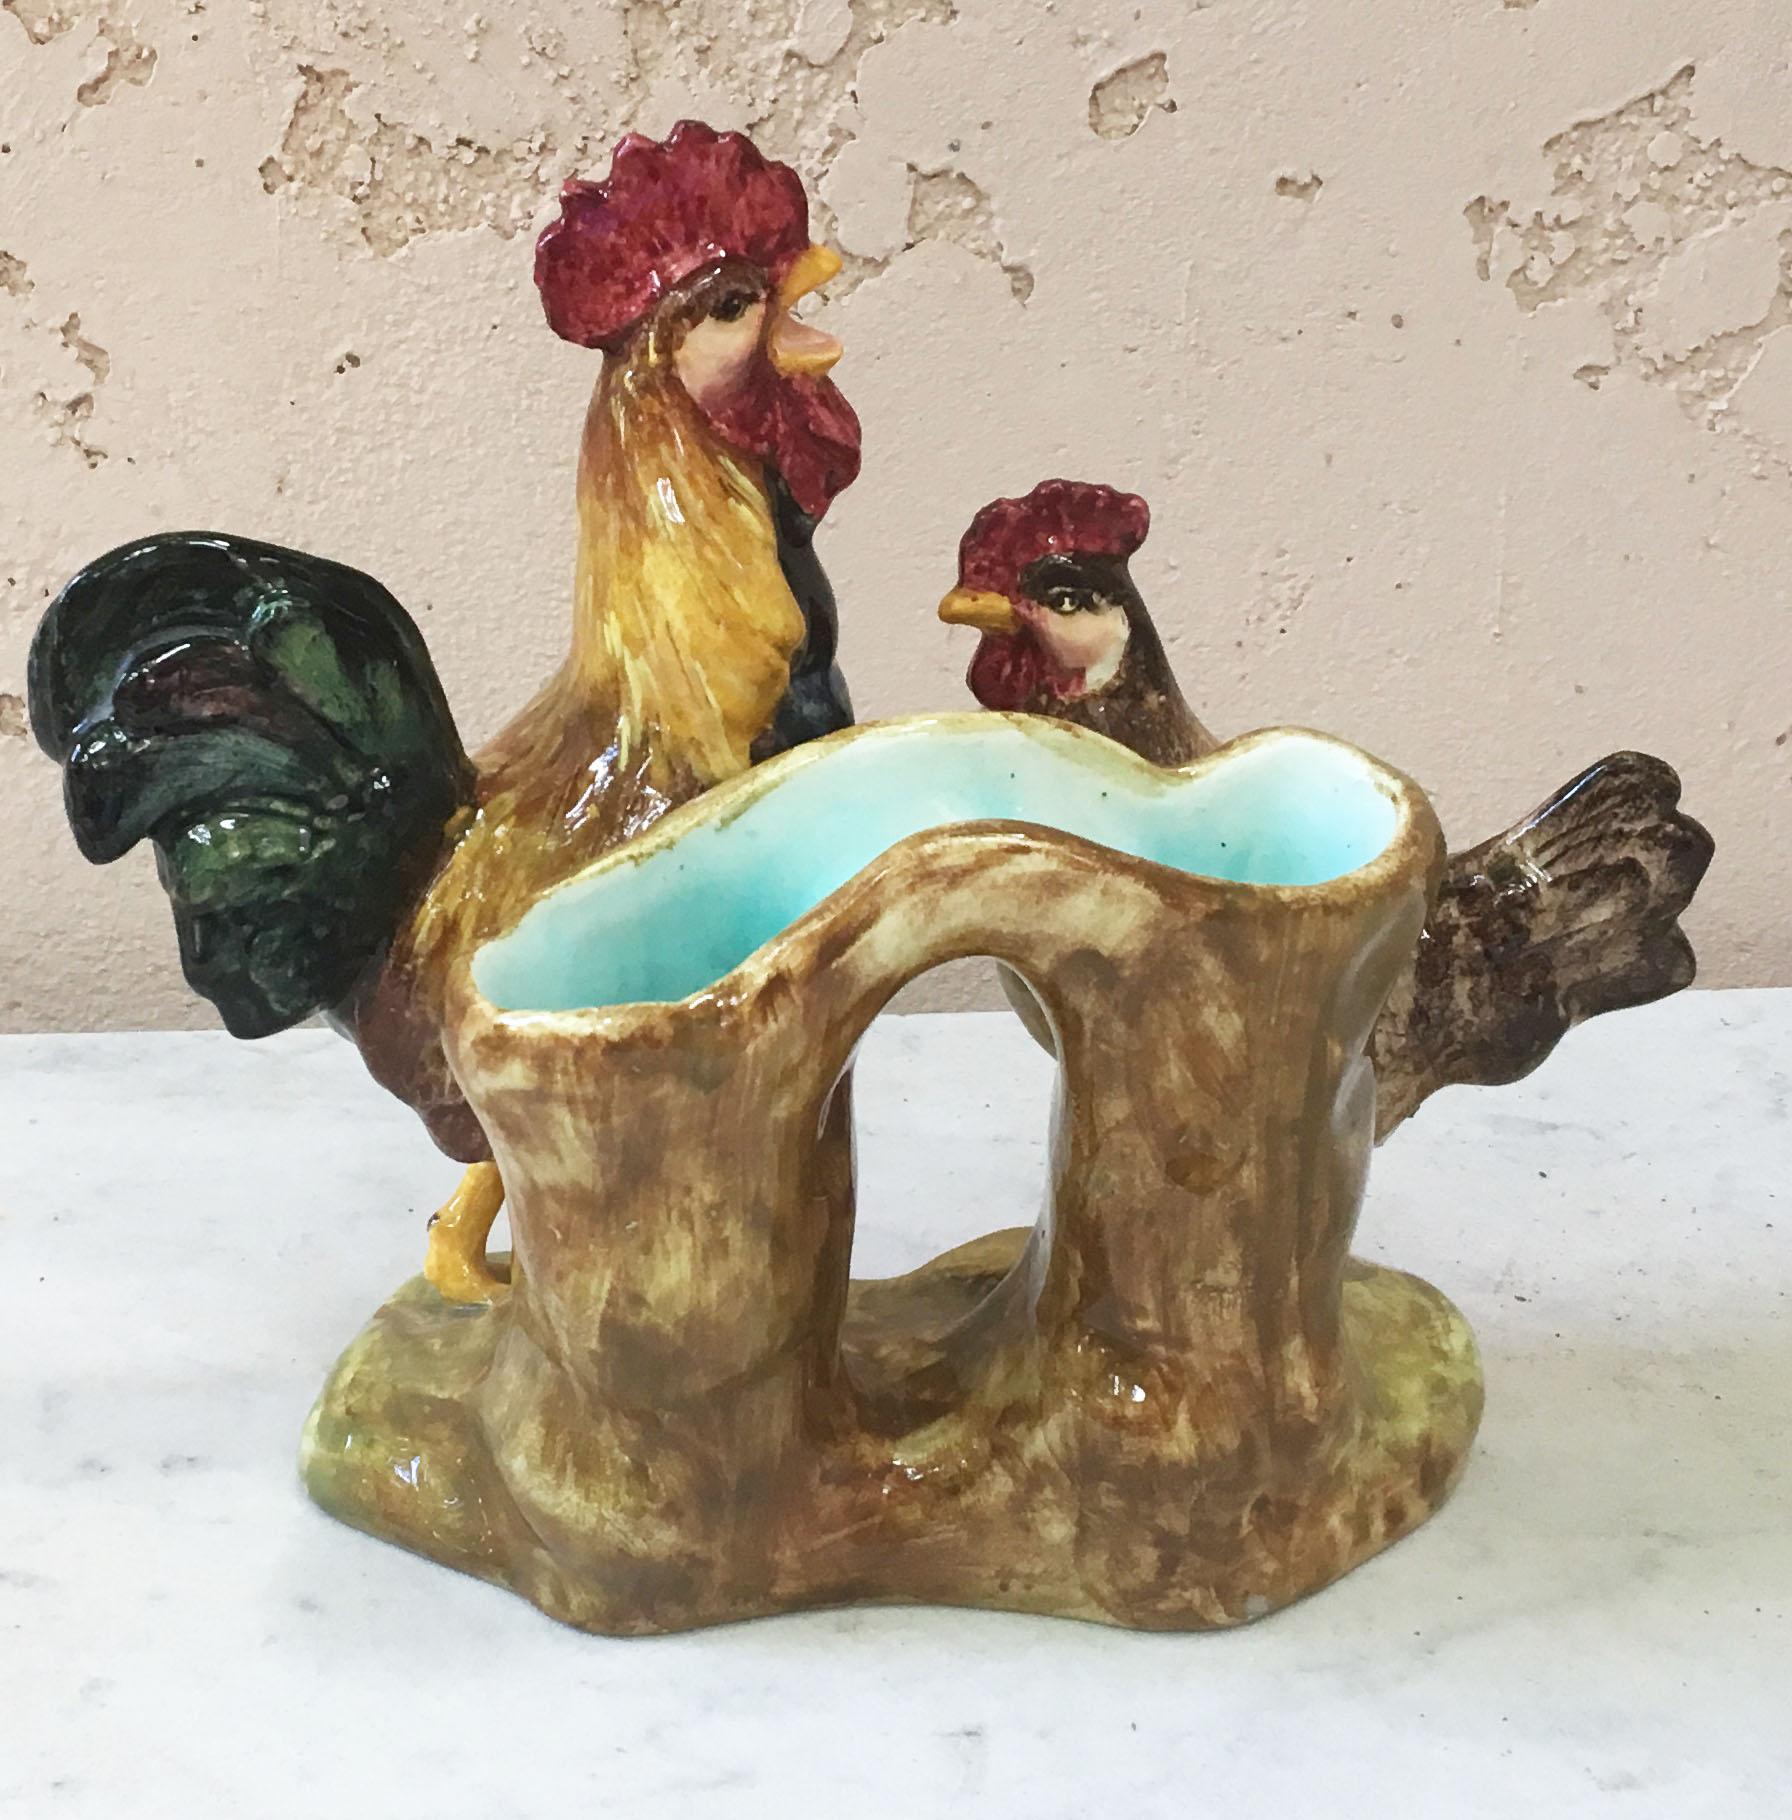 Charming Majolica vase with a rooster and hen against a trunk signed Delphin Massier, circa 1890.
Reference / A similar example of this piece page 83 